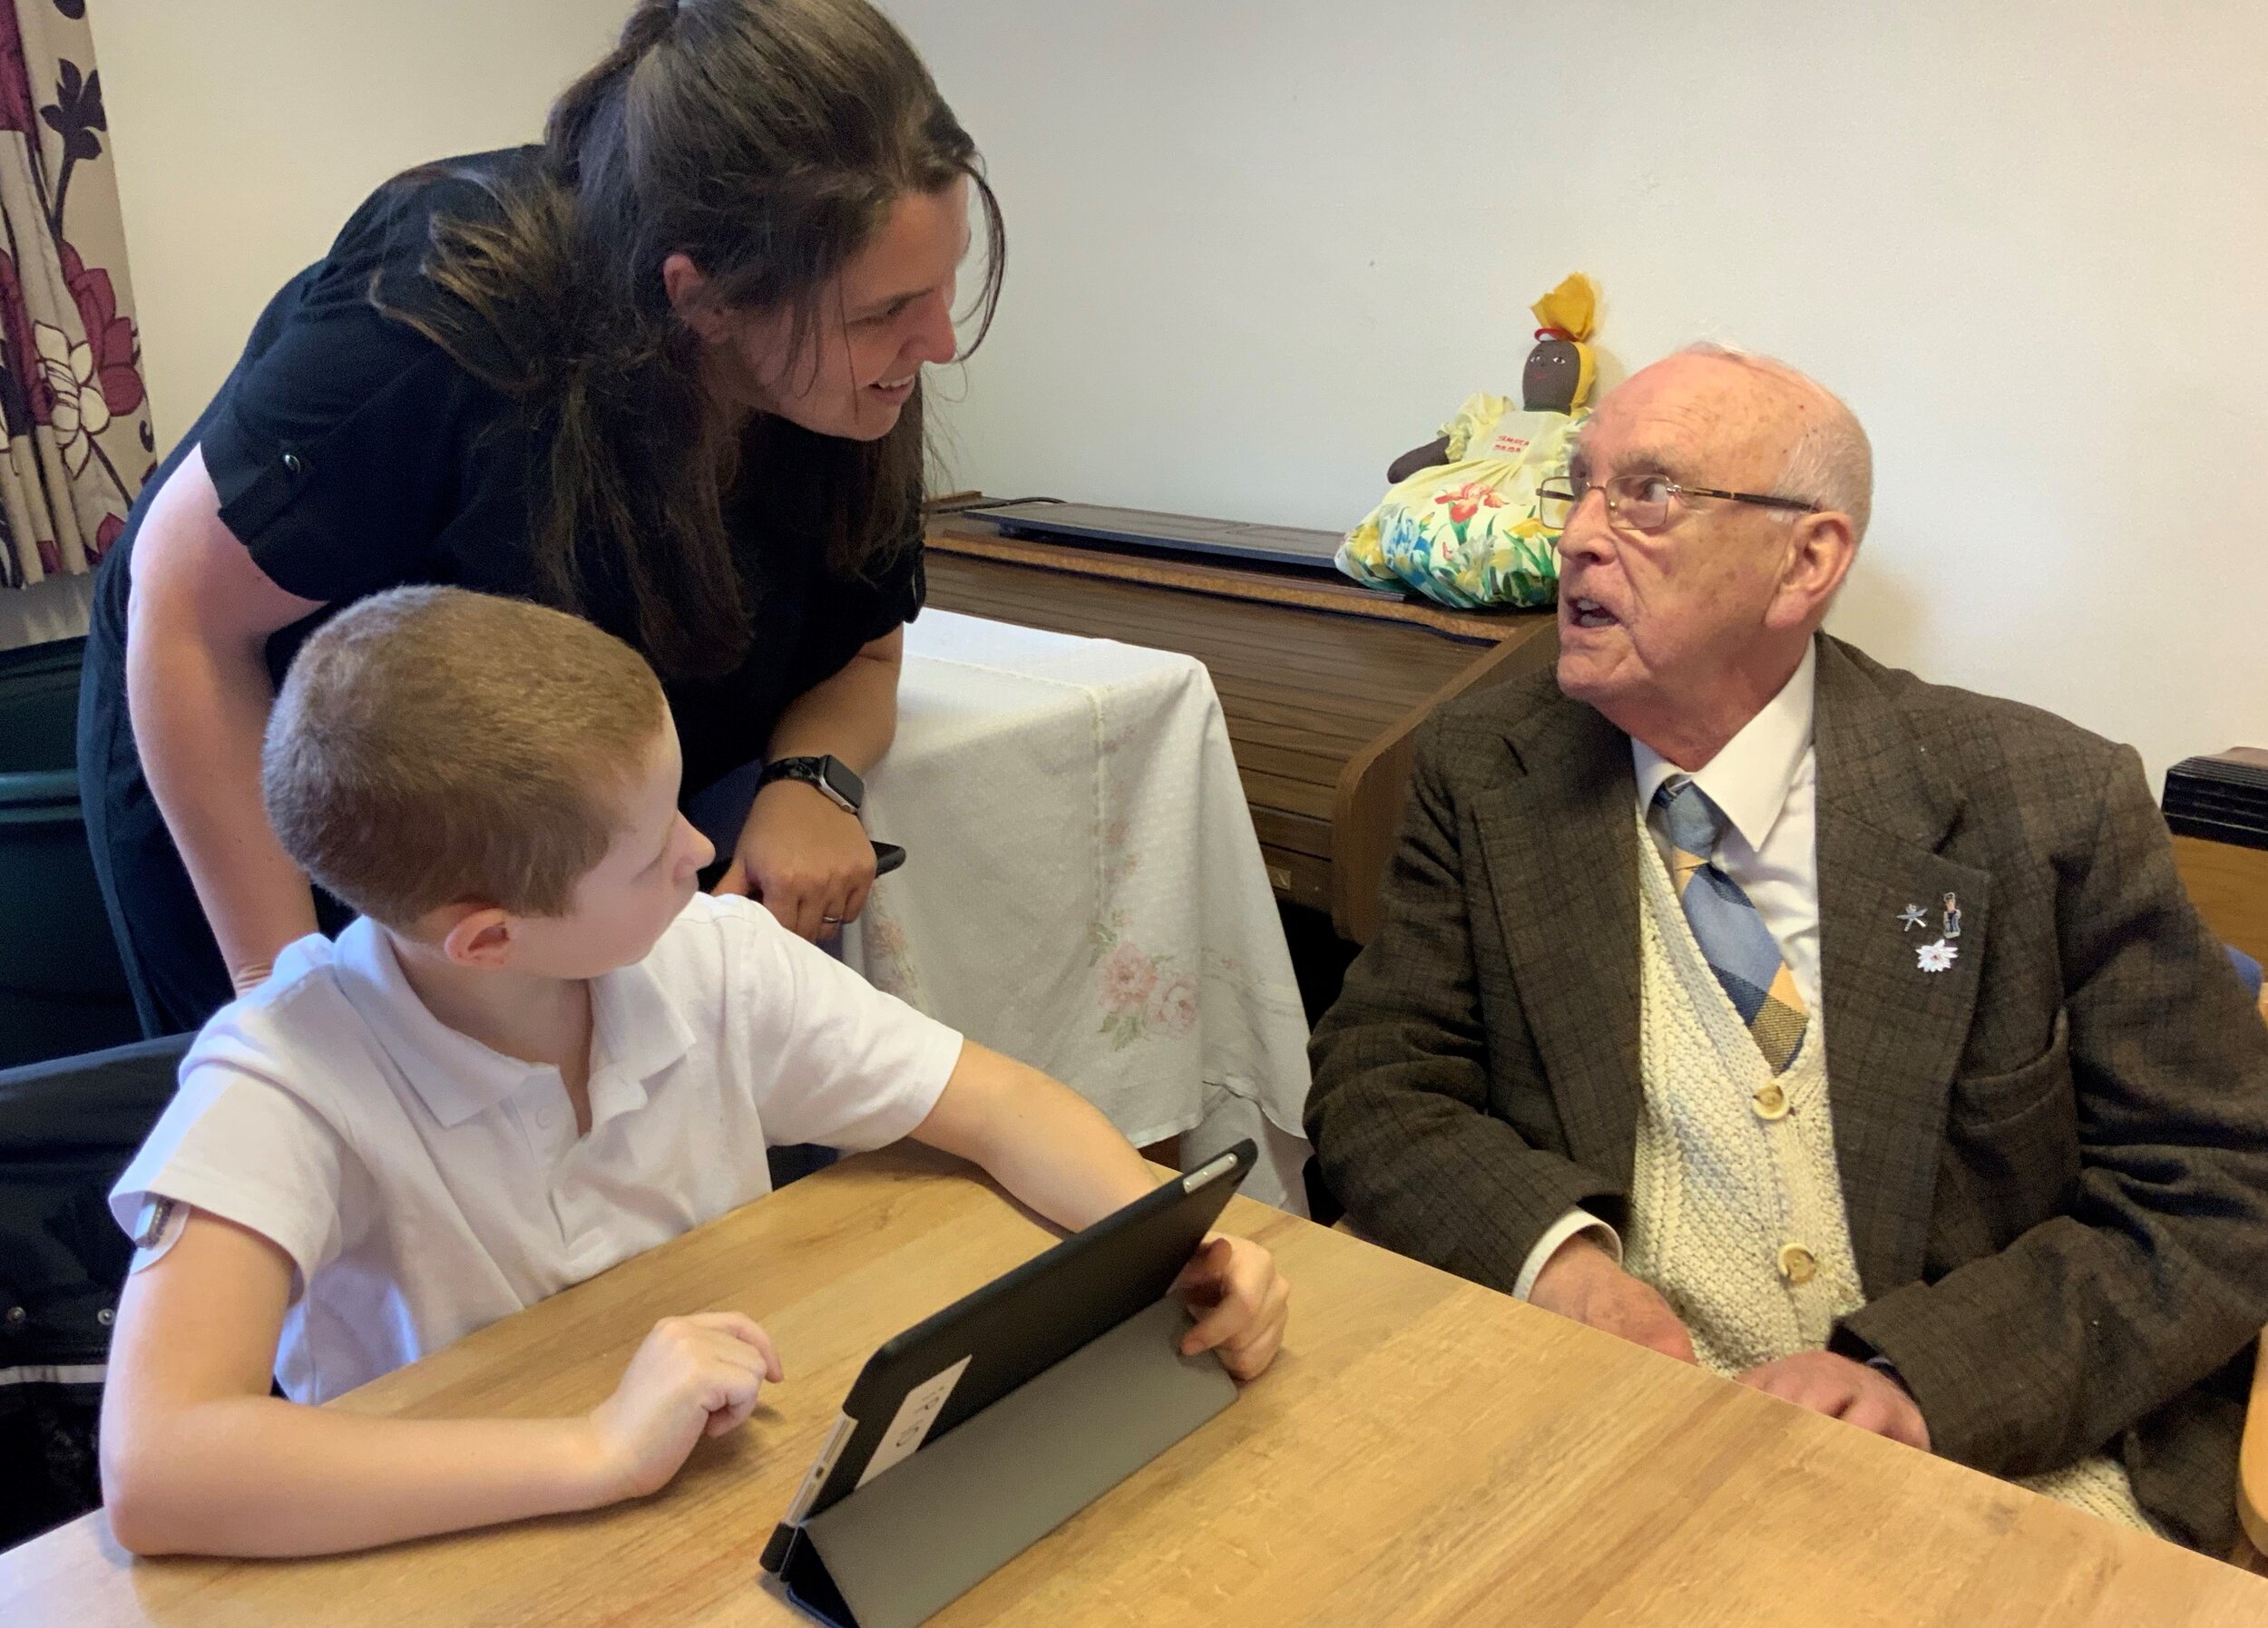 Tutor explaining how some features work to a school boy and older man